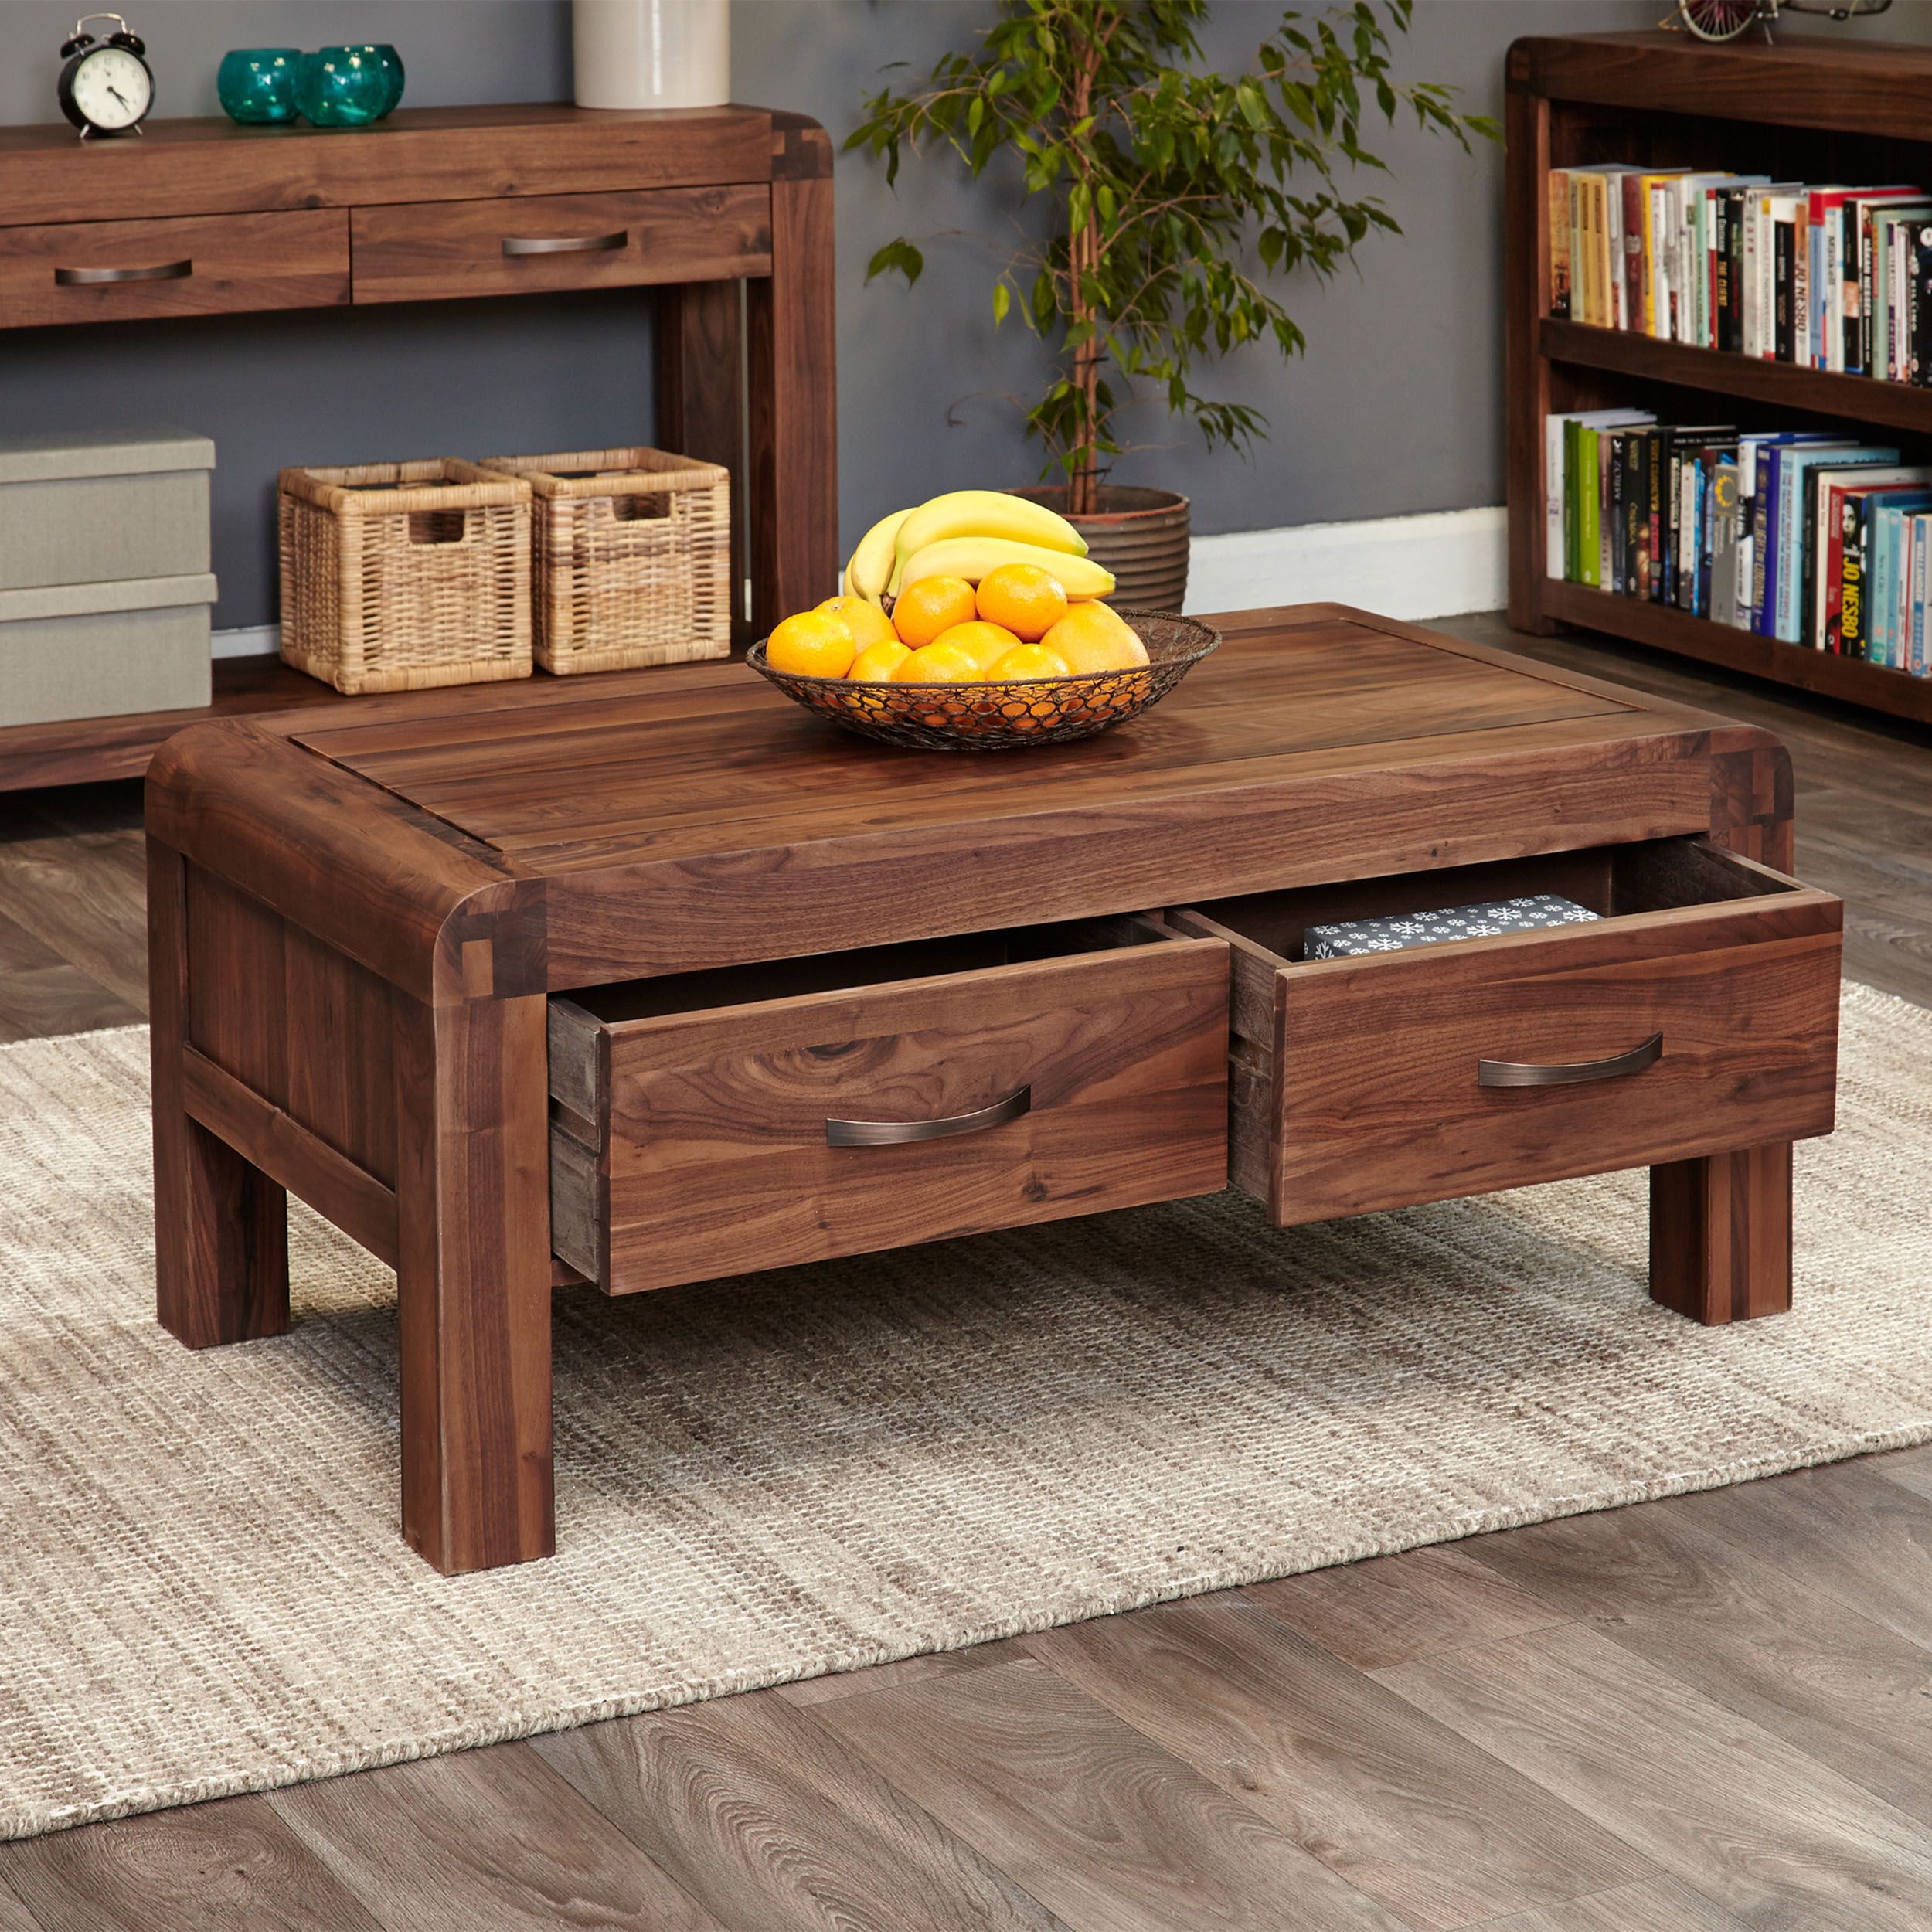 Solid Walnut Coffee Table With Storage – Shiro Intended For Wood Coffee Tables With 2 Tier Storage (View 11 of 15)